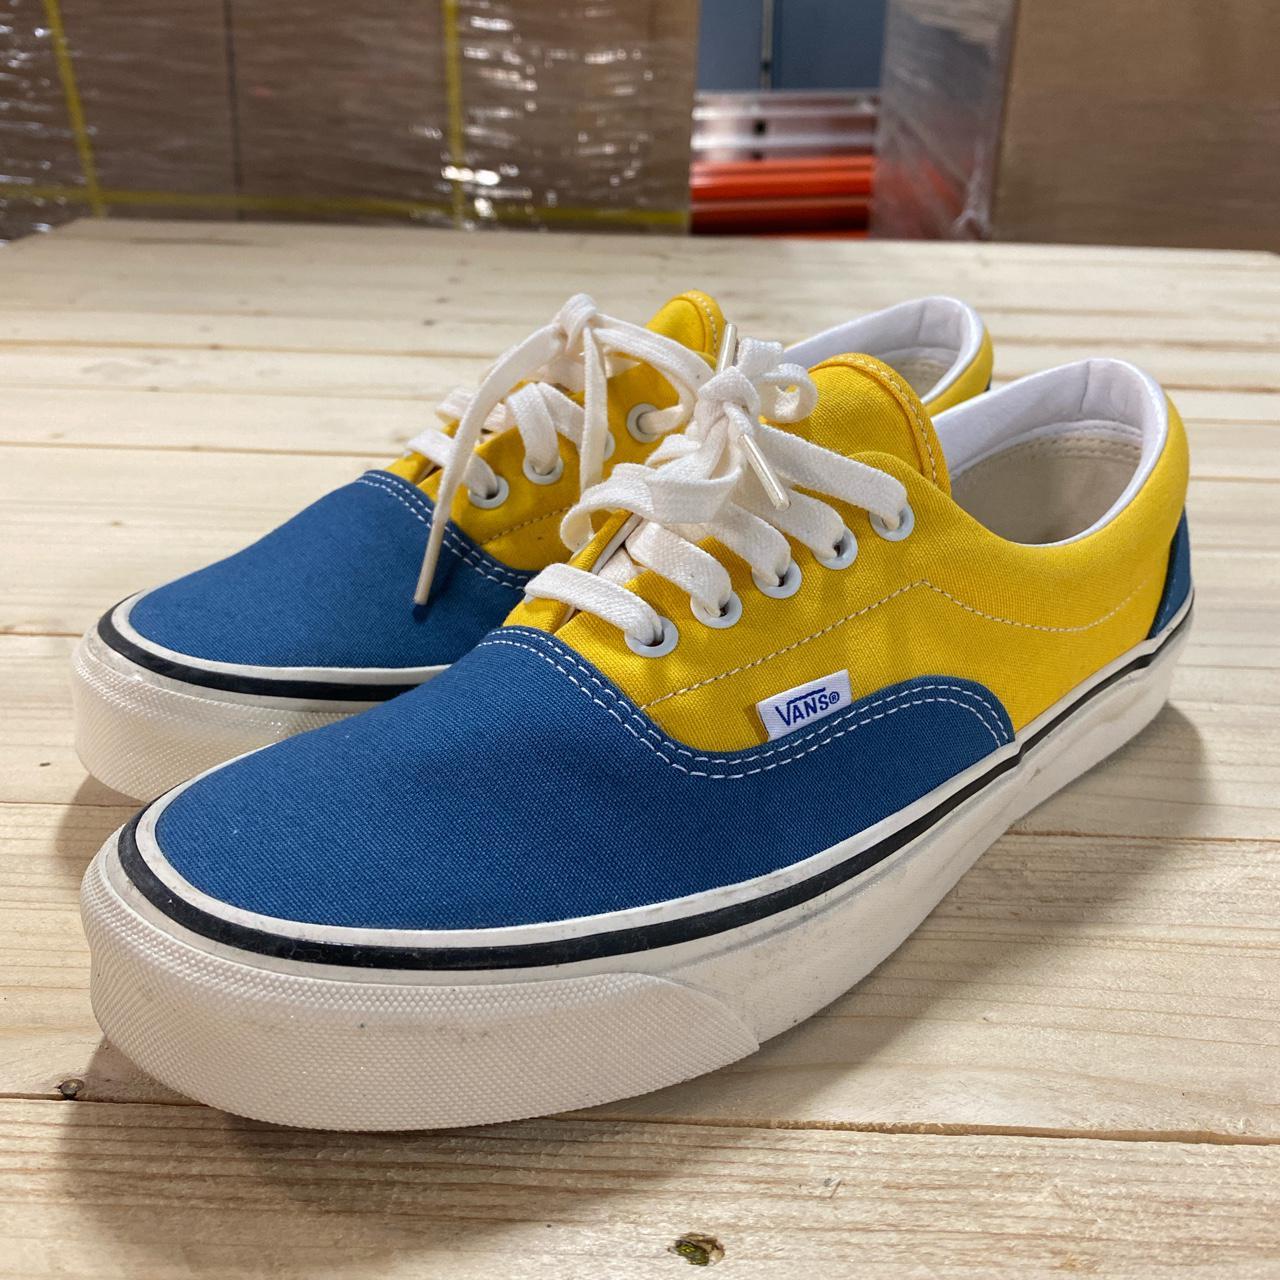 Vans Men's Blue and Yellow Trainers (2)